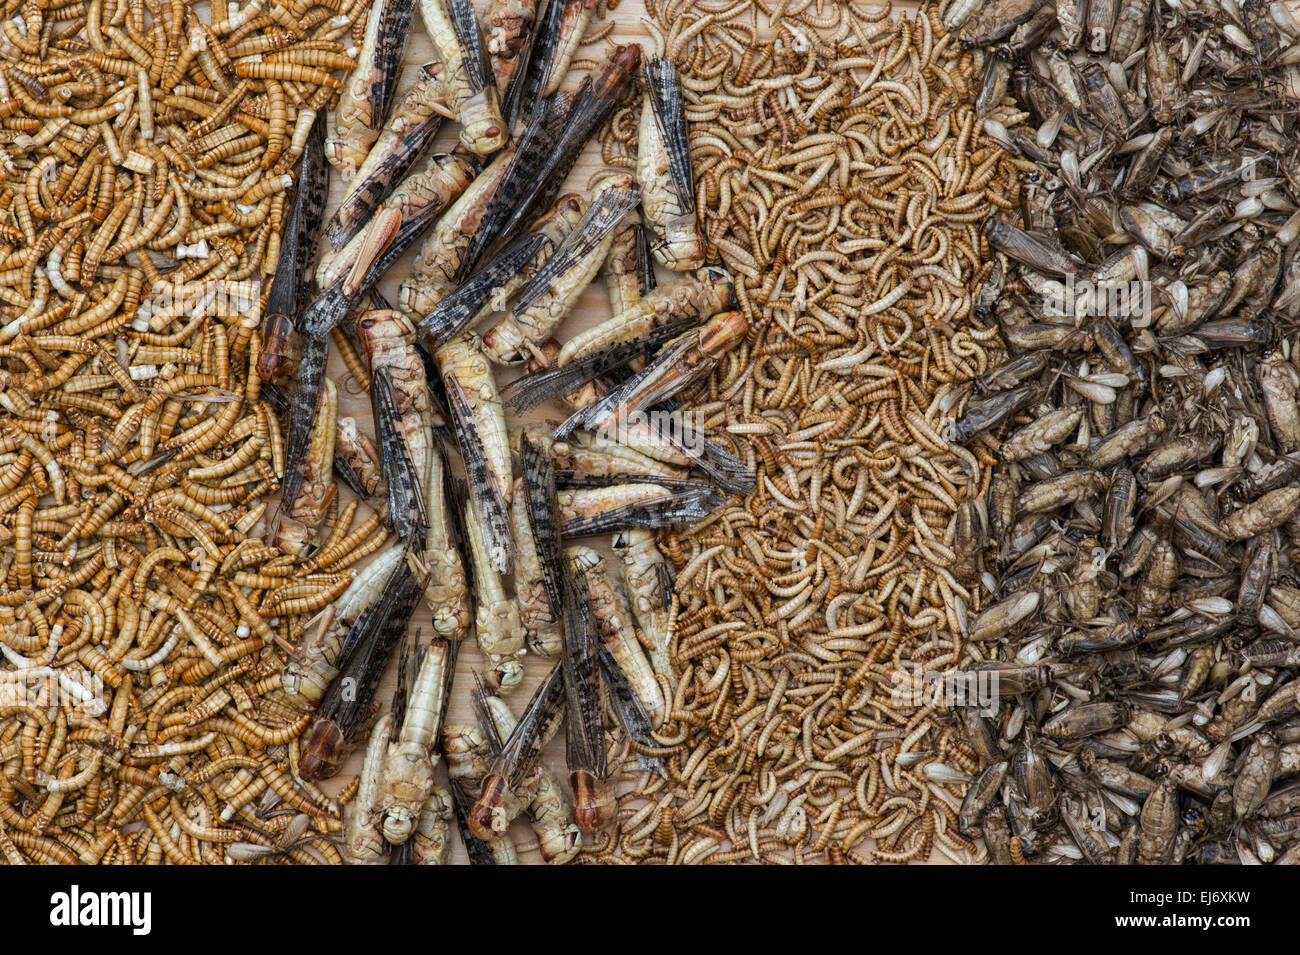 Edible insects. Grasshoppers, Buffalo Worms, Crickets and Mealworms. Food of the future Stock Photo